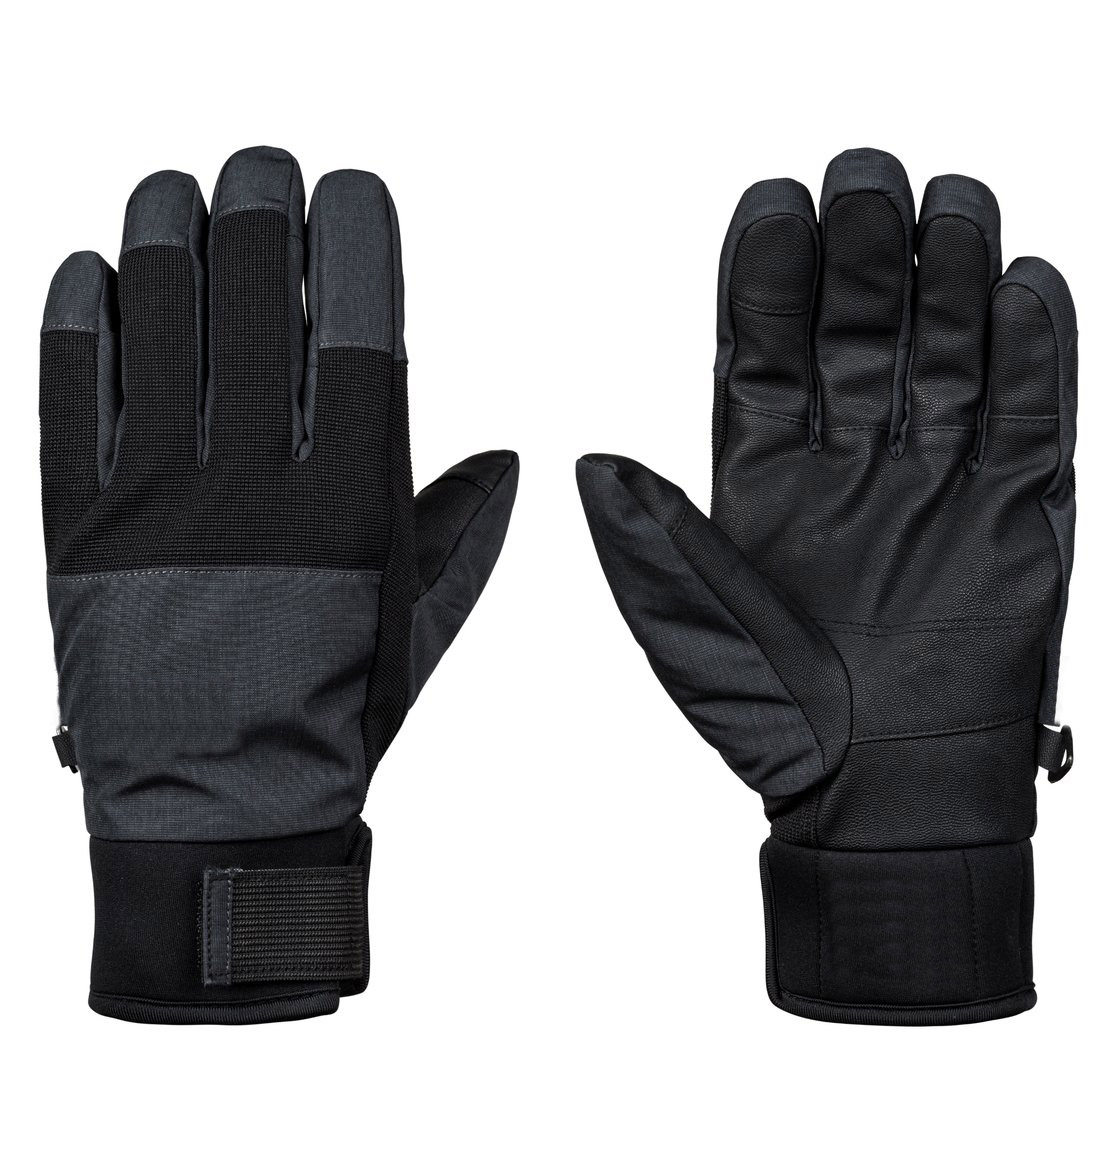 High quality Snowboard Ski Gloves leather waterproof and thinsulate warm